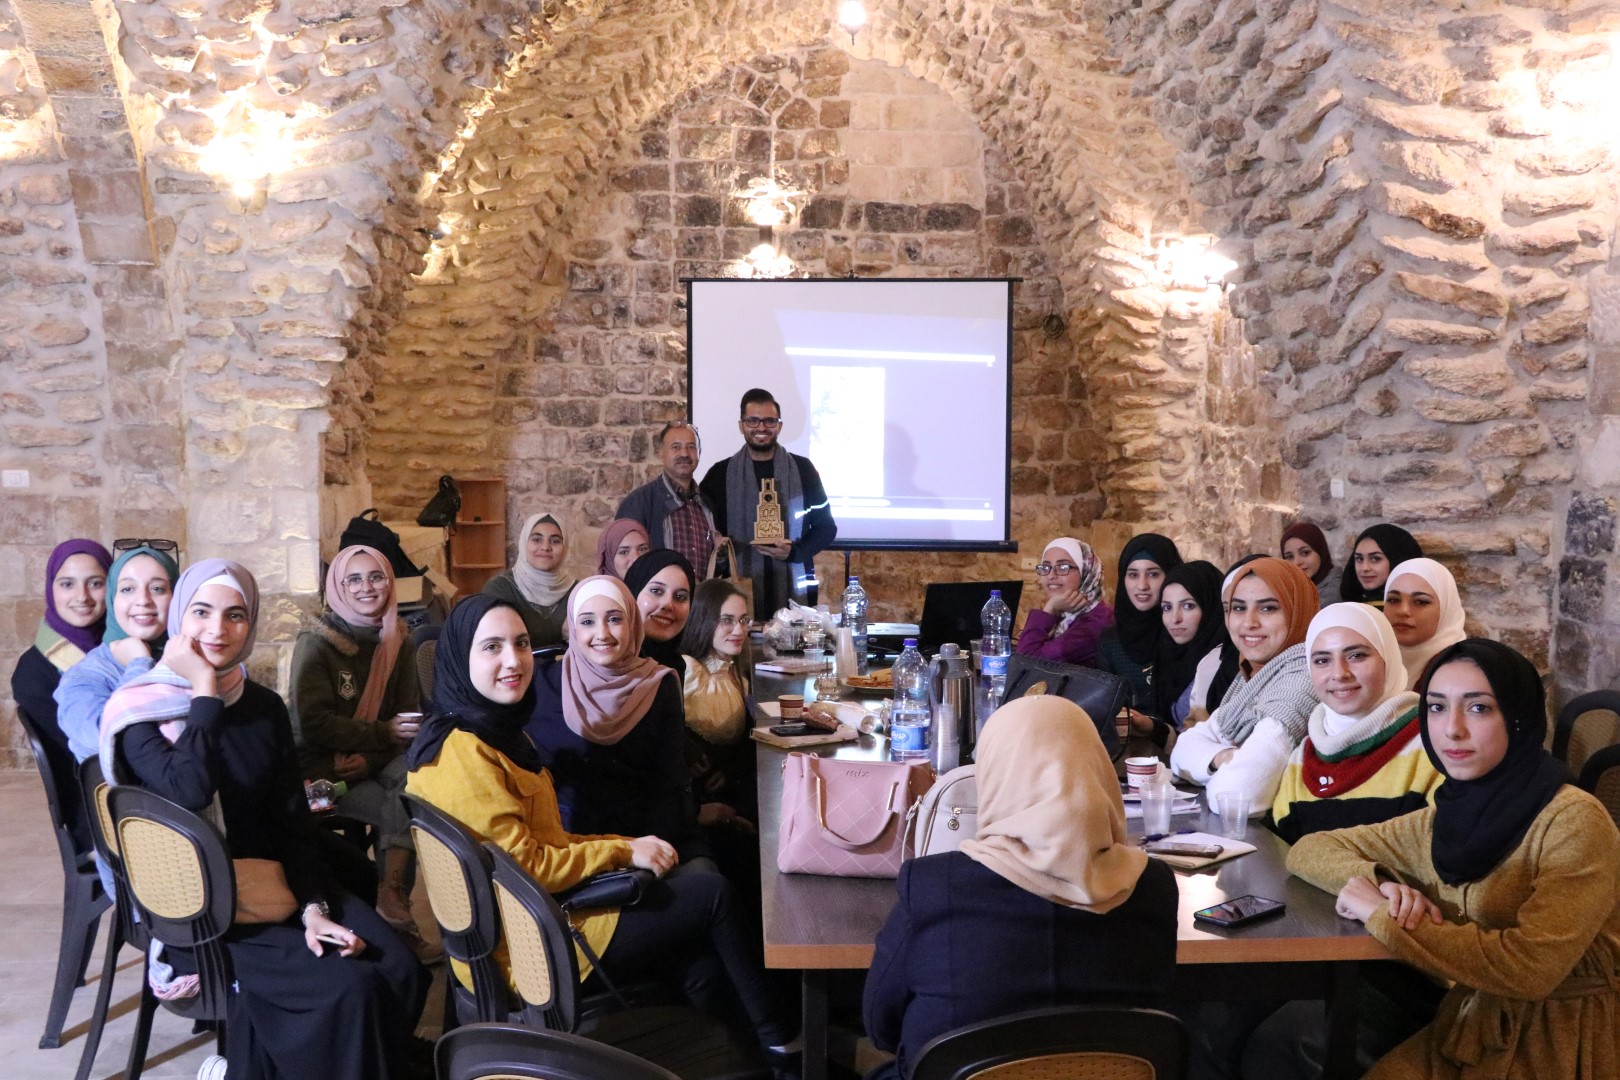 A workshop on ethnographic photography in the cultural center